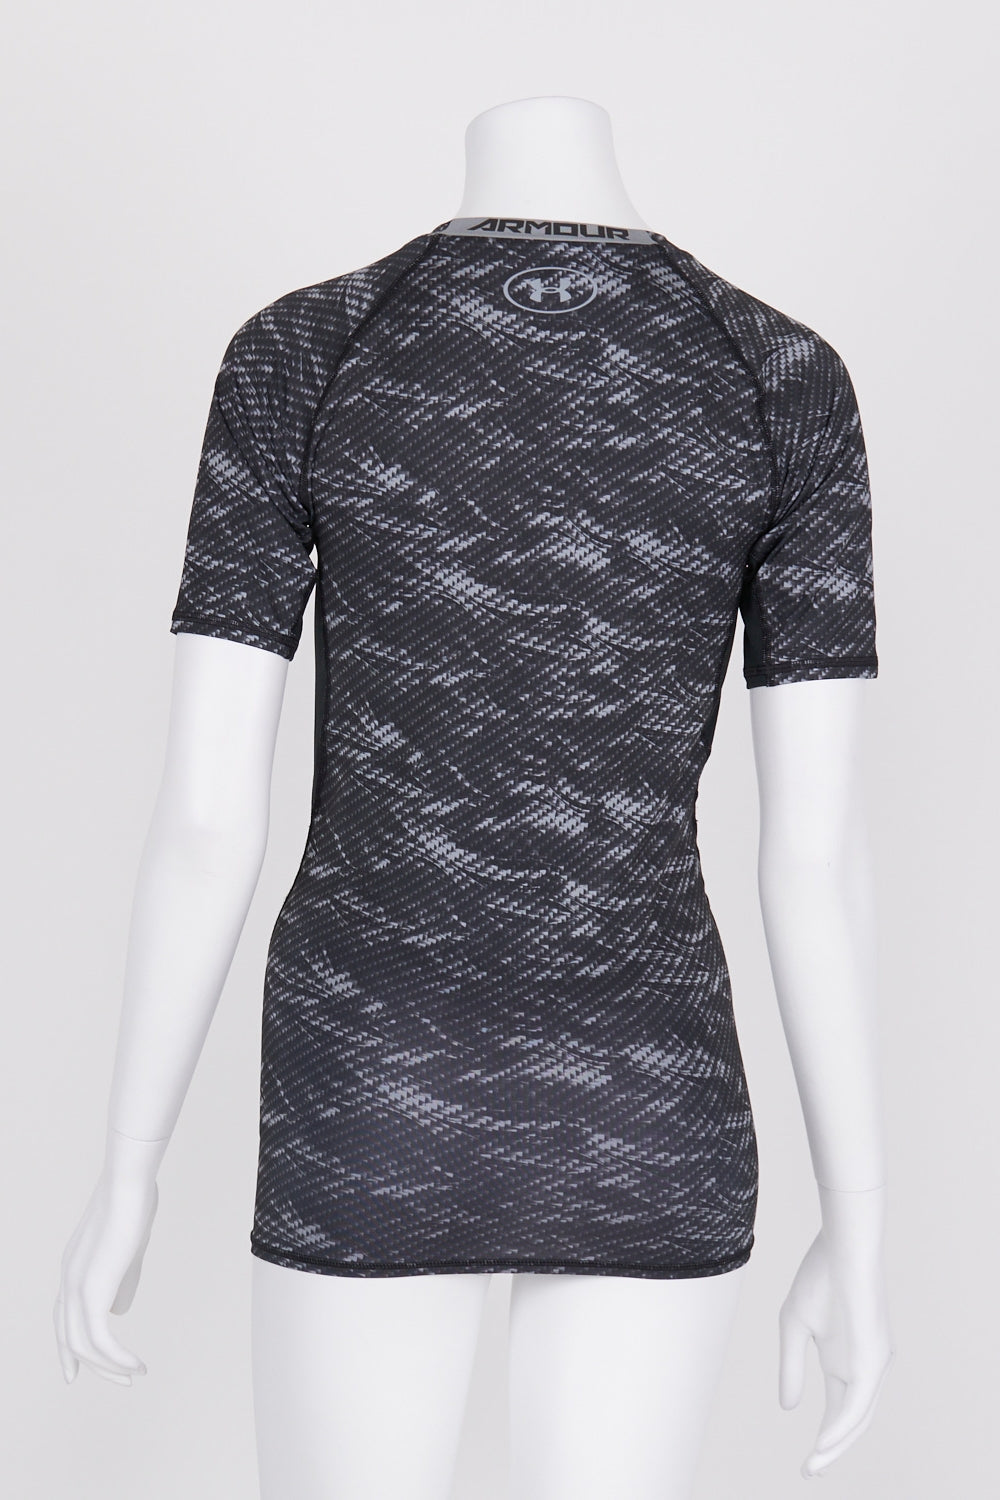 Under Armour Black Patterned Top S/M